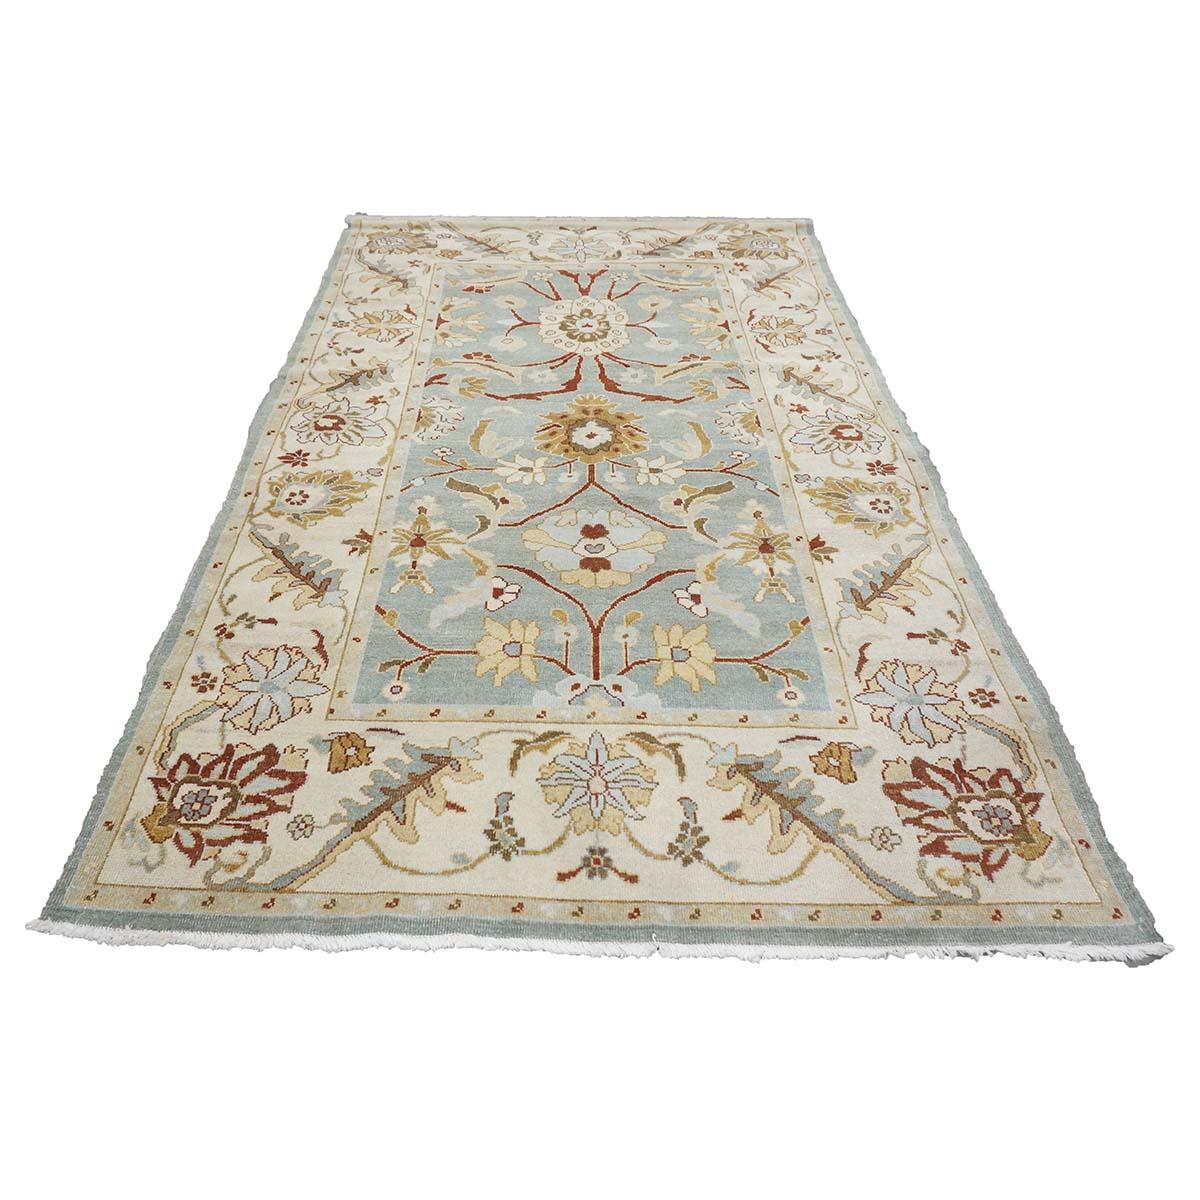  Ashly Fine Rugs presents an antique recreation of an original Persian Sultanabad. Part of our own previous production, this antique recreation was thought of and created in-house and 100% handmade in Afghanistan by master weavers. Sultanabads are